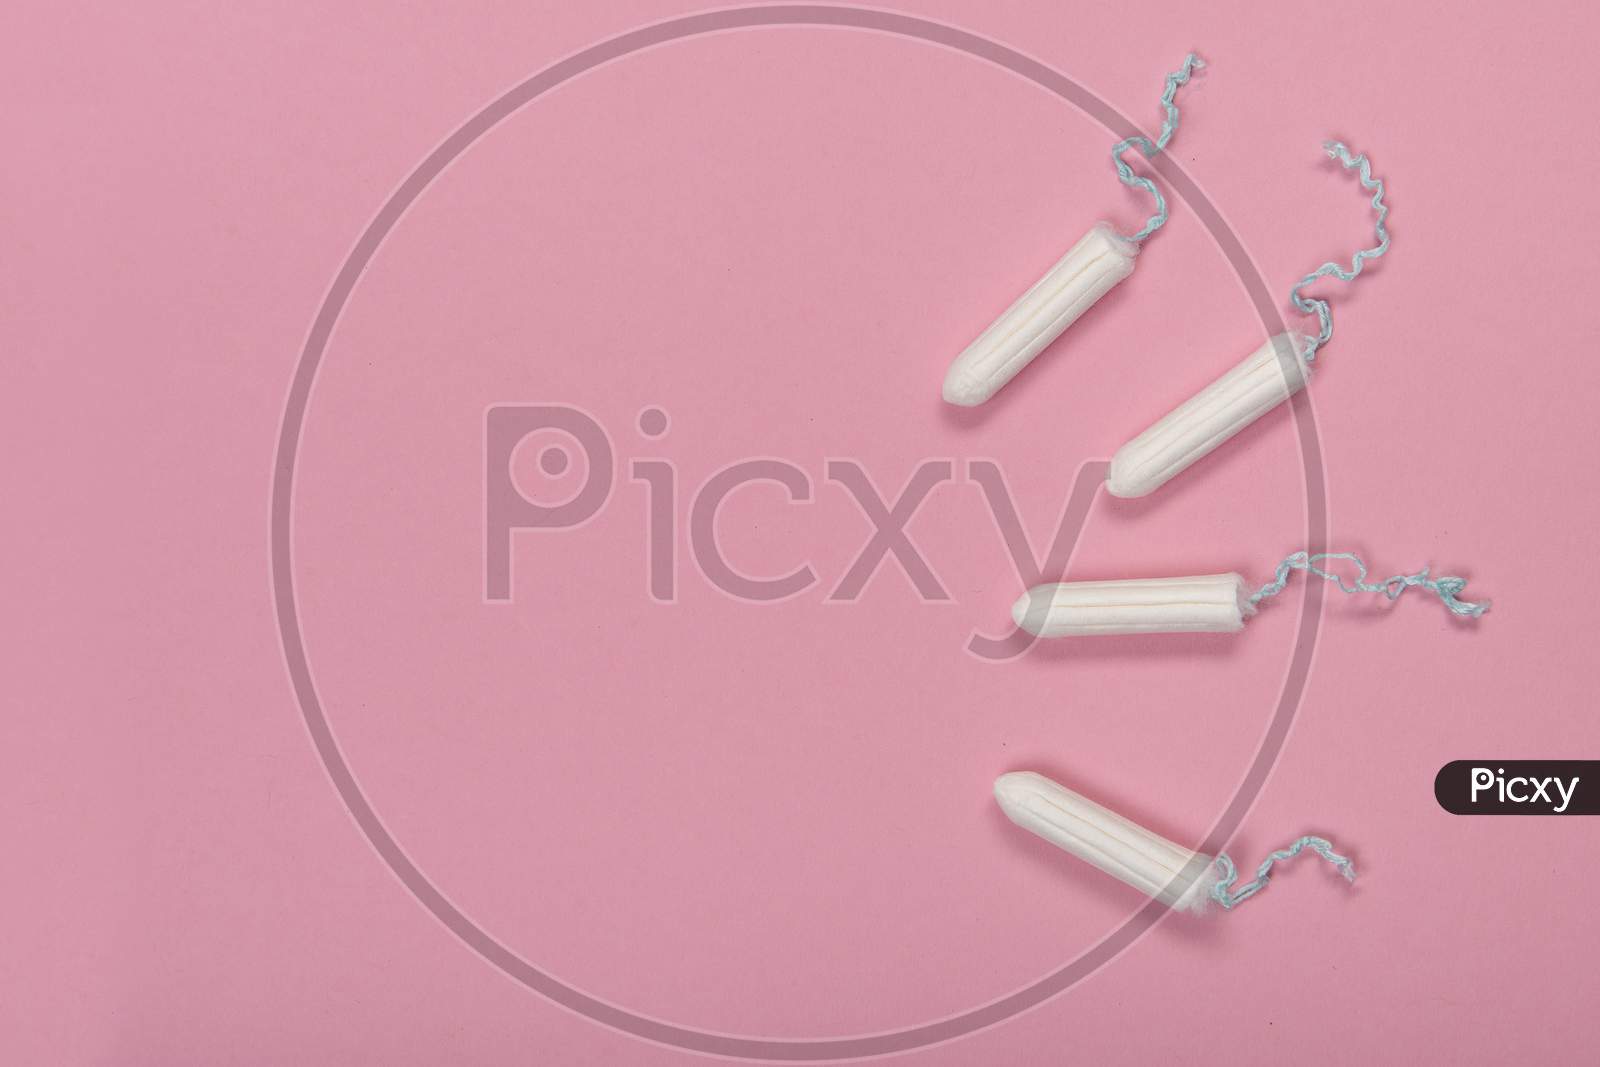 Group Of Tampons Seen From A High Angle View On A Pink Background With Space For Copy